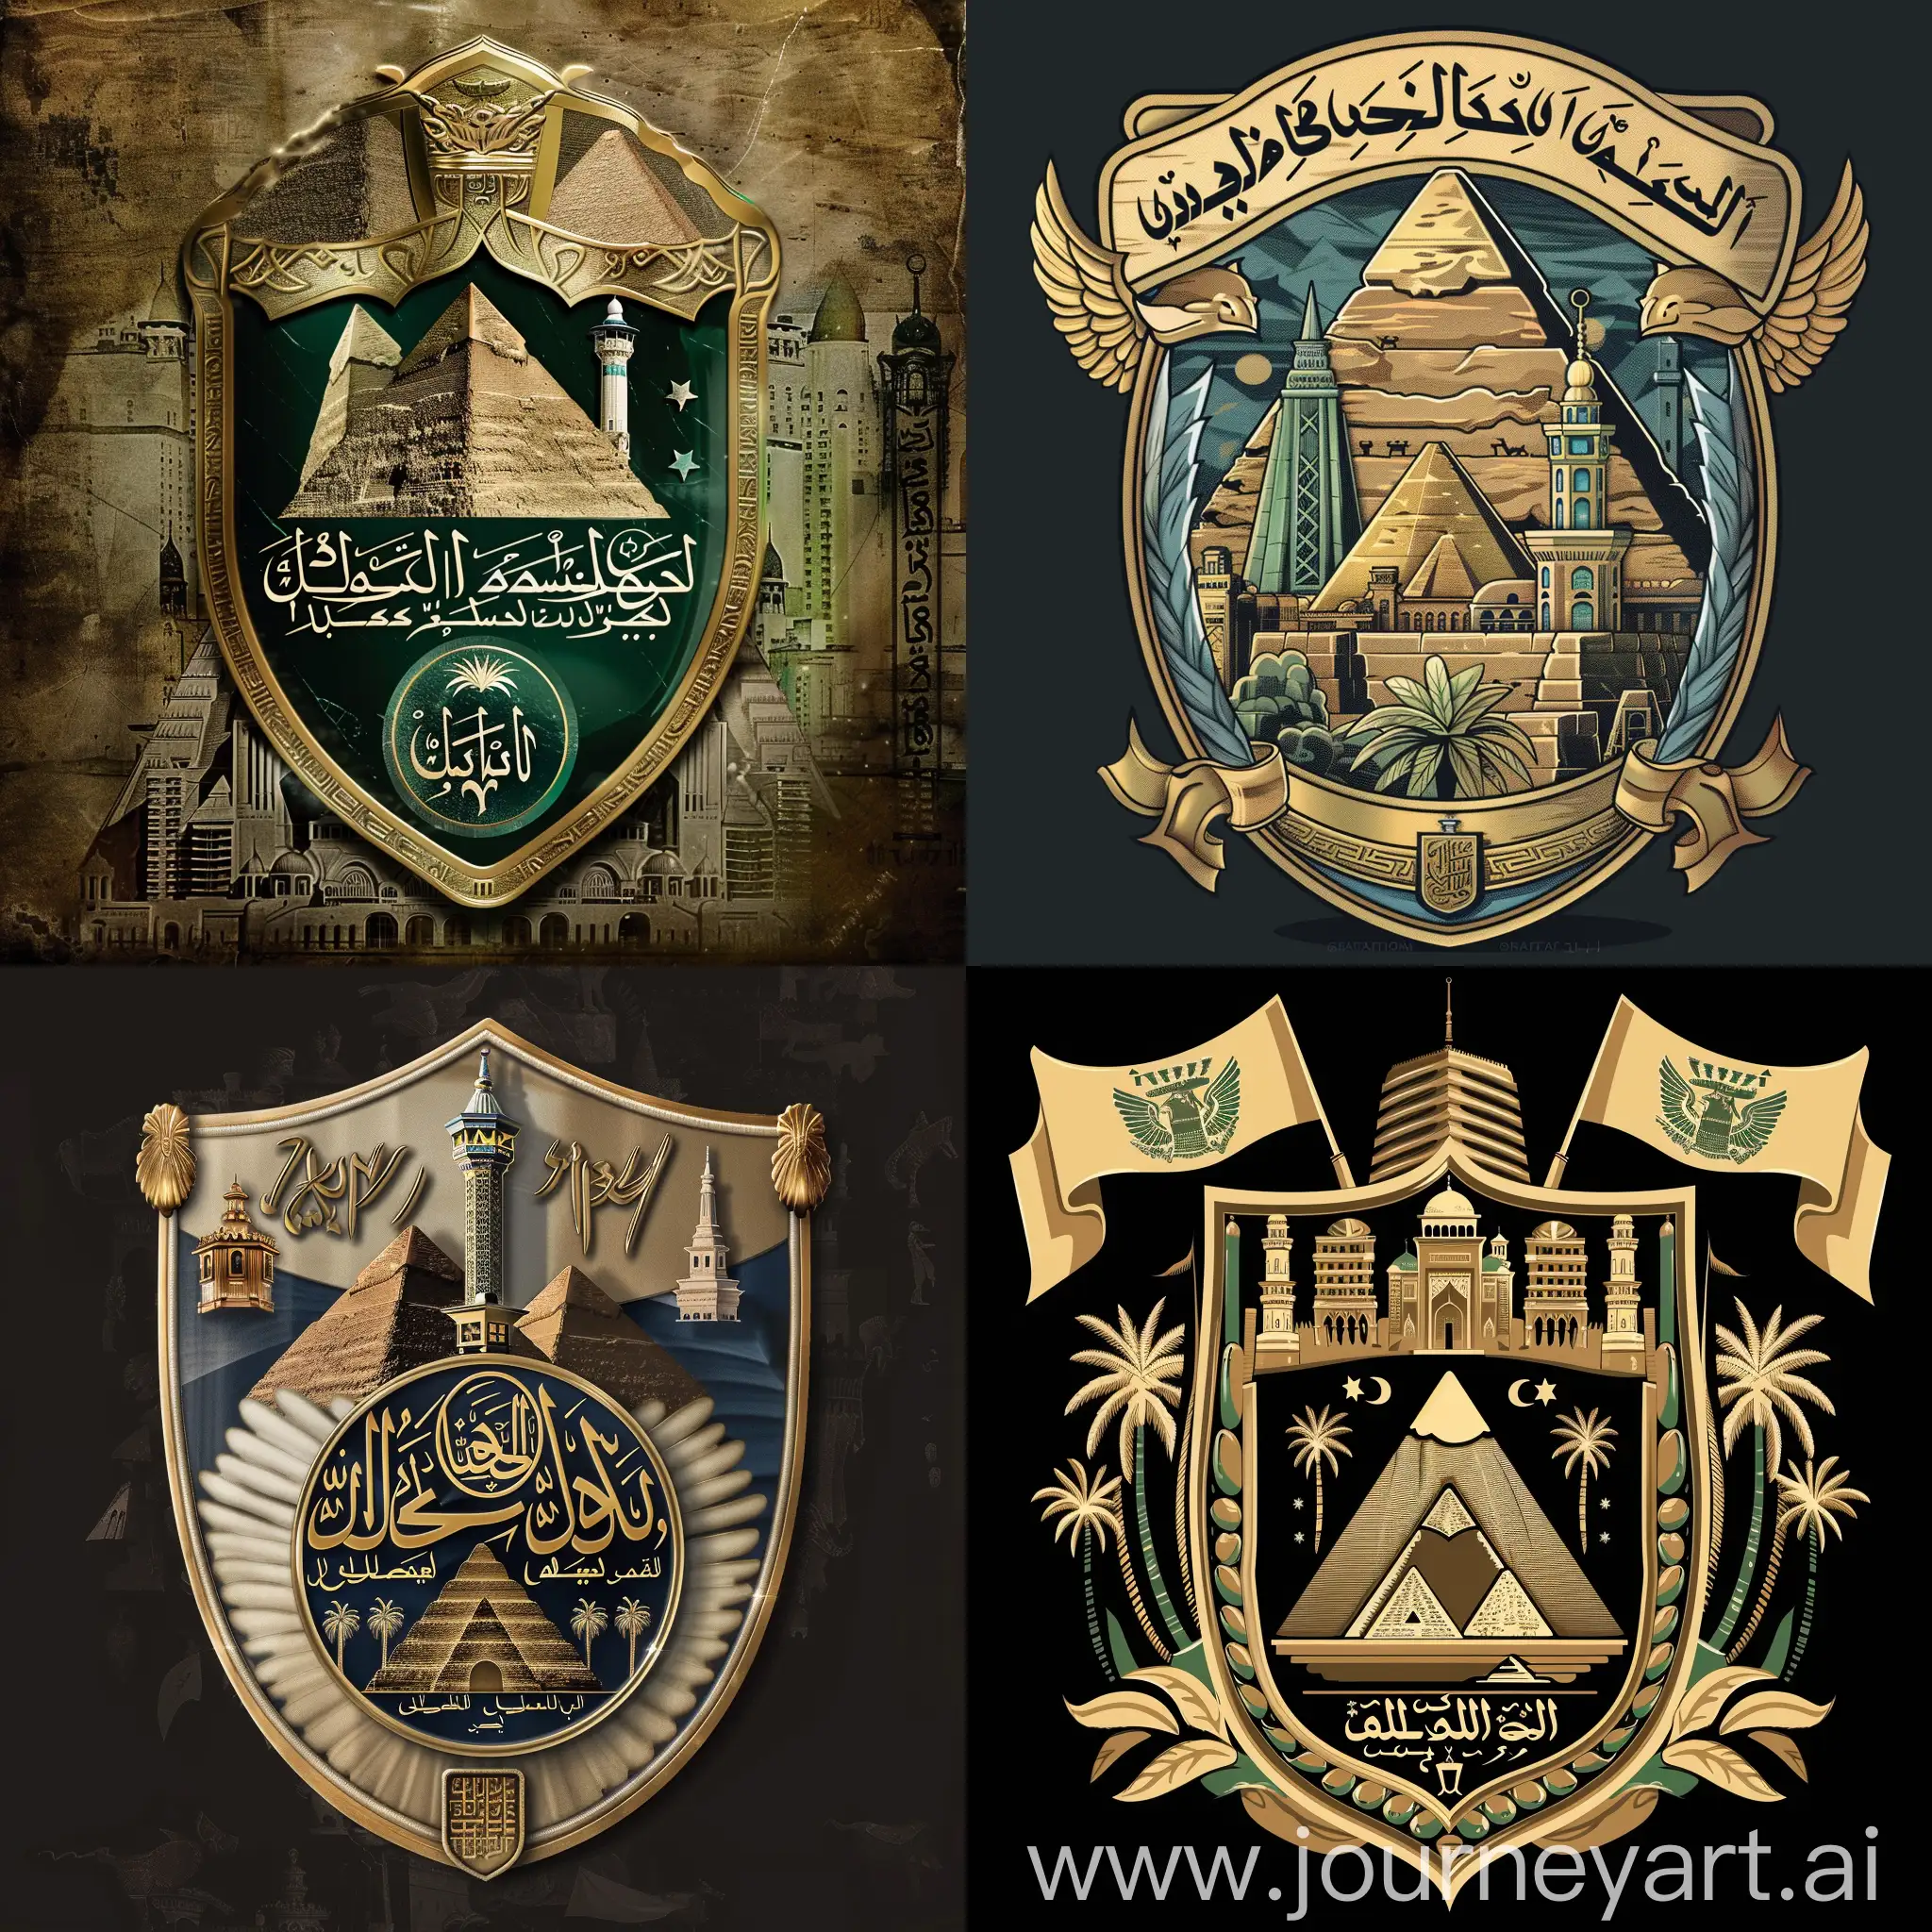 A shield for the football match containing the emblem of the State of Egypt and the emblem of the State of Saudi Arabia, with the pyramids and the Sphinx in addition to the Kingdom Tower, Al-Faisaliah, and the Palace of Governance.